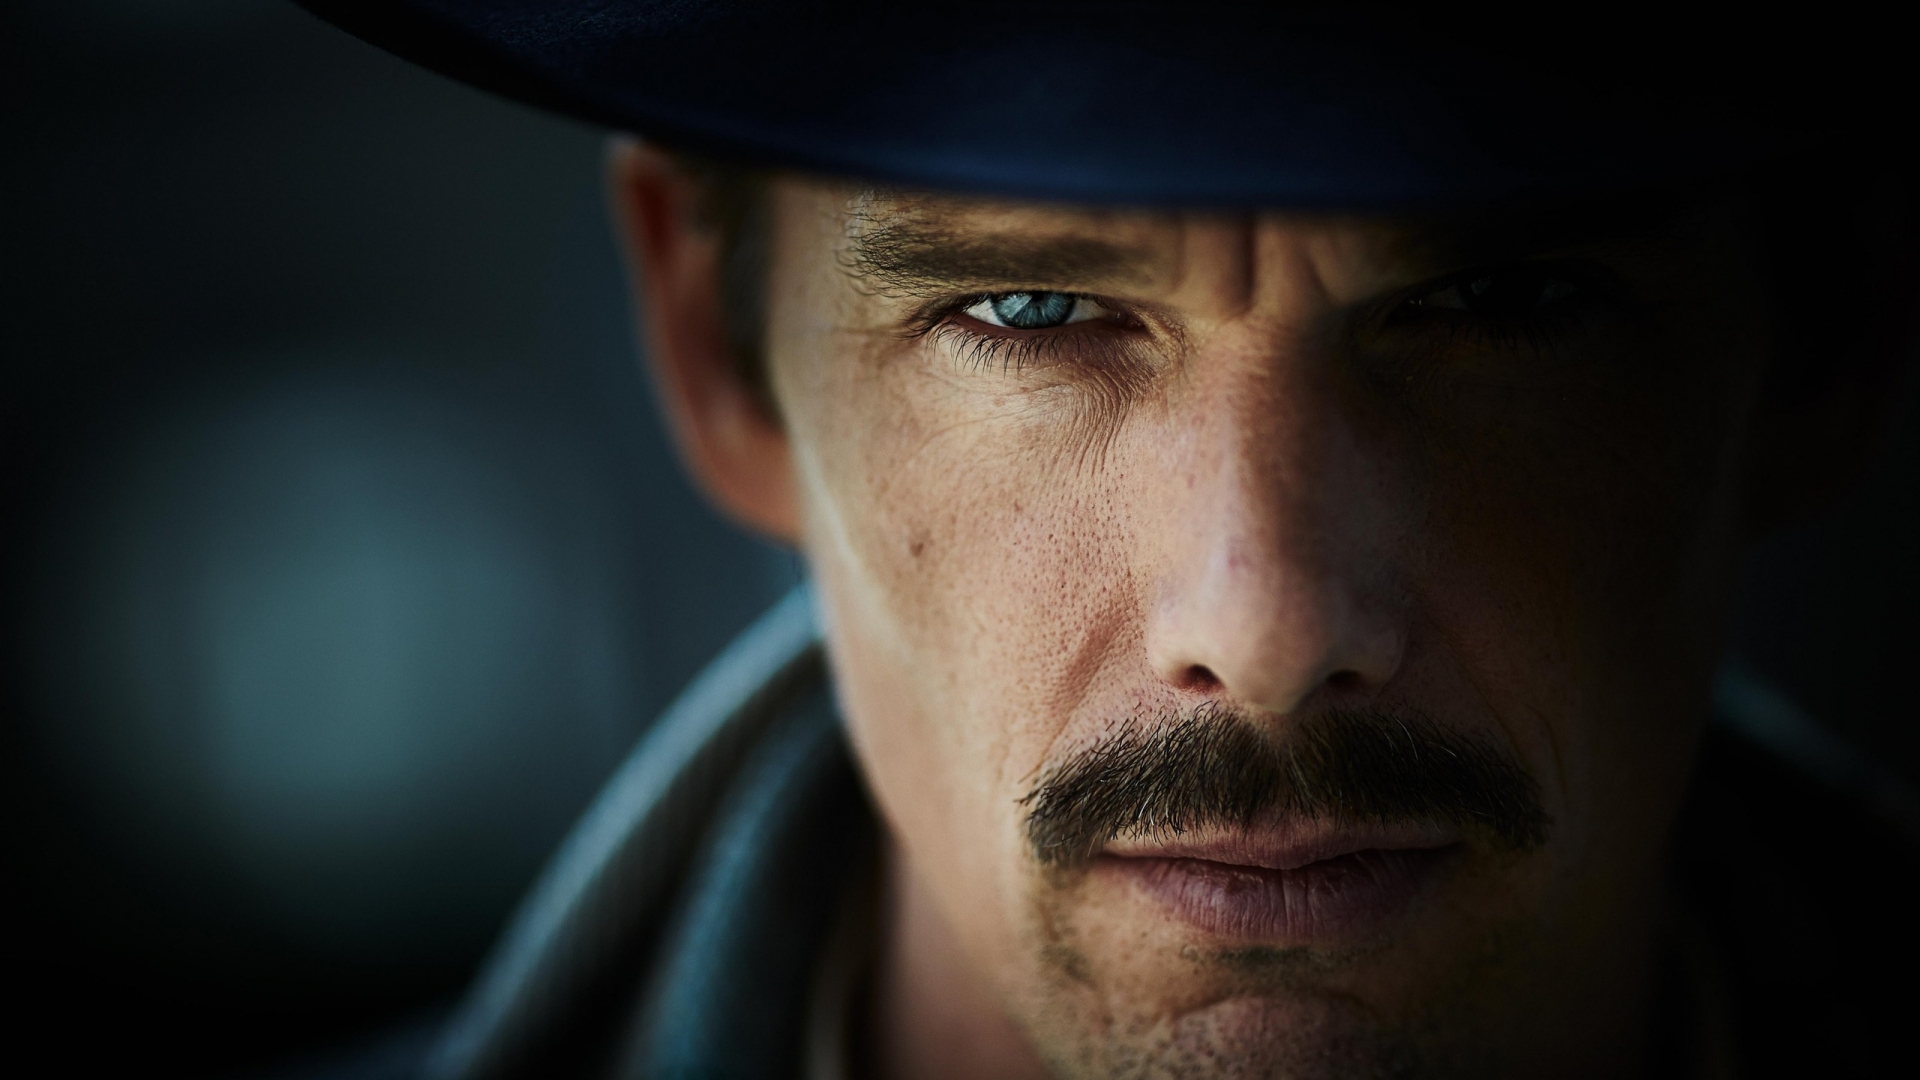 Ethan Hawke Look for 1920 x 1080 HDTV 1080p resolution